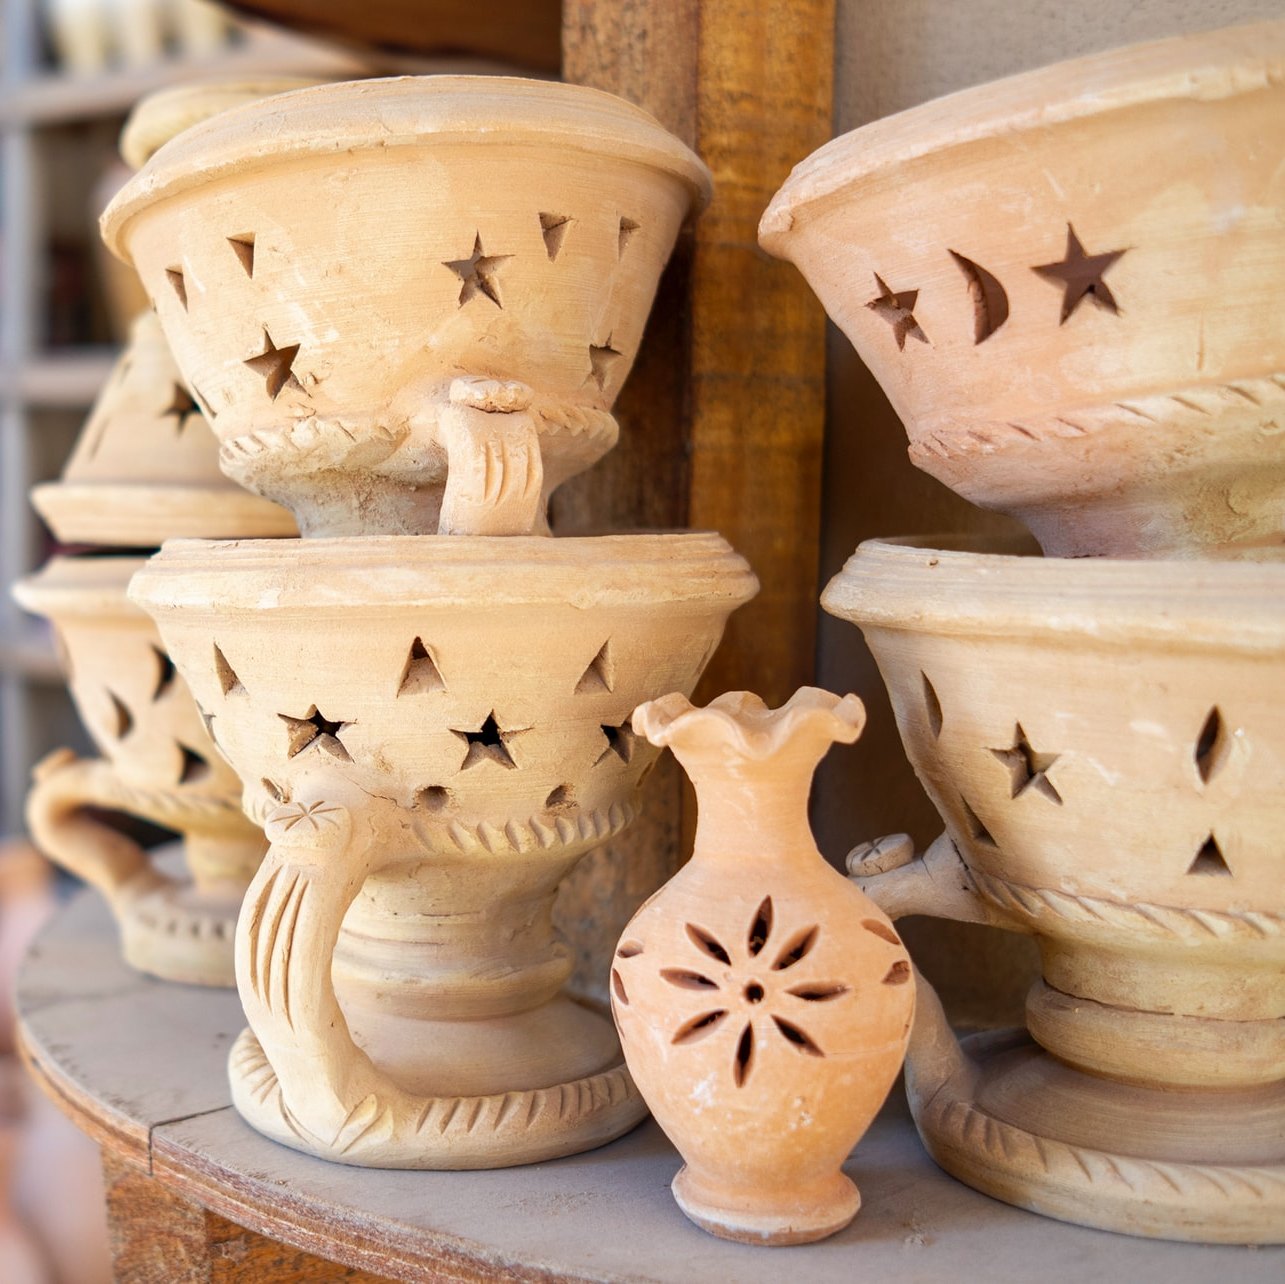 How to Ship Pottery Safely: 5 Quick and Effective Tips for 2022